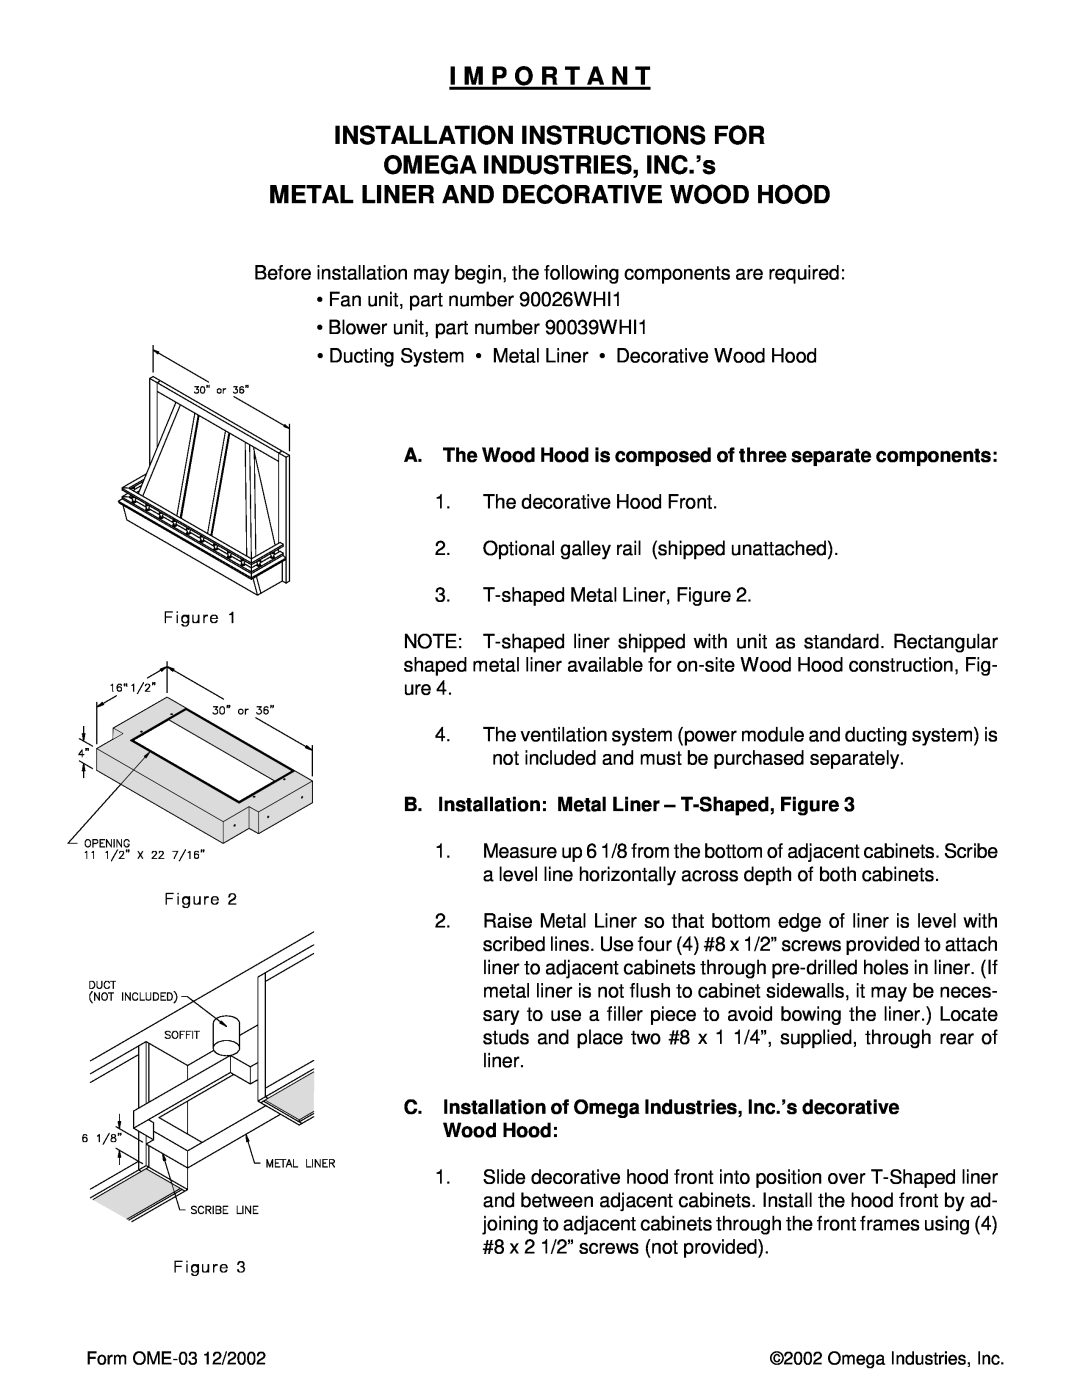 Omega Speaker Systems Metal Liner and Decorative Wood Hood installation instructions OMEGA INDUSTRIES, INC.’s 